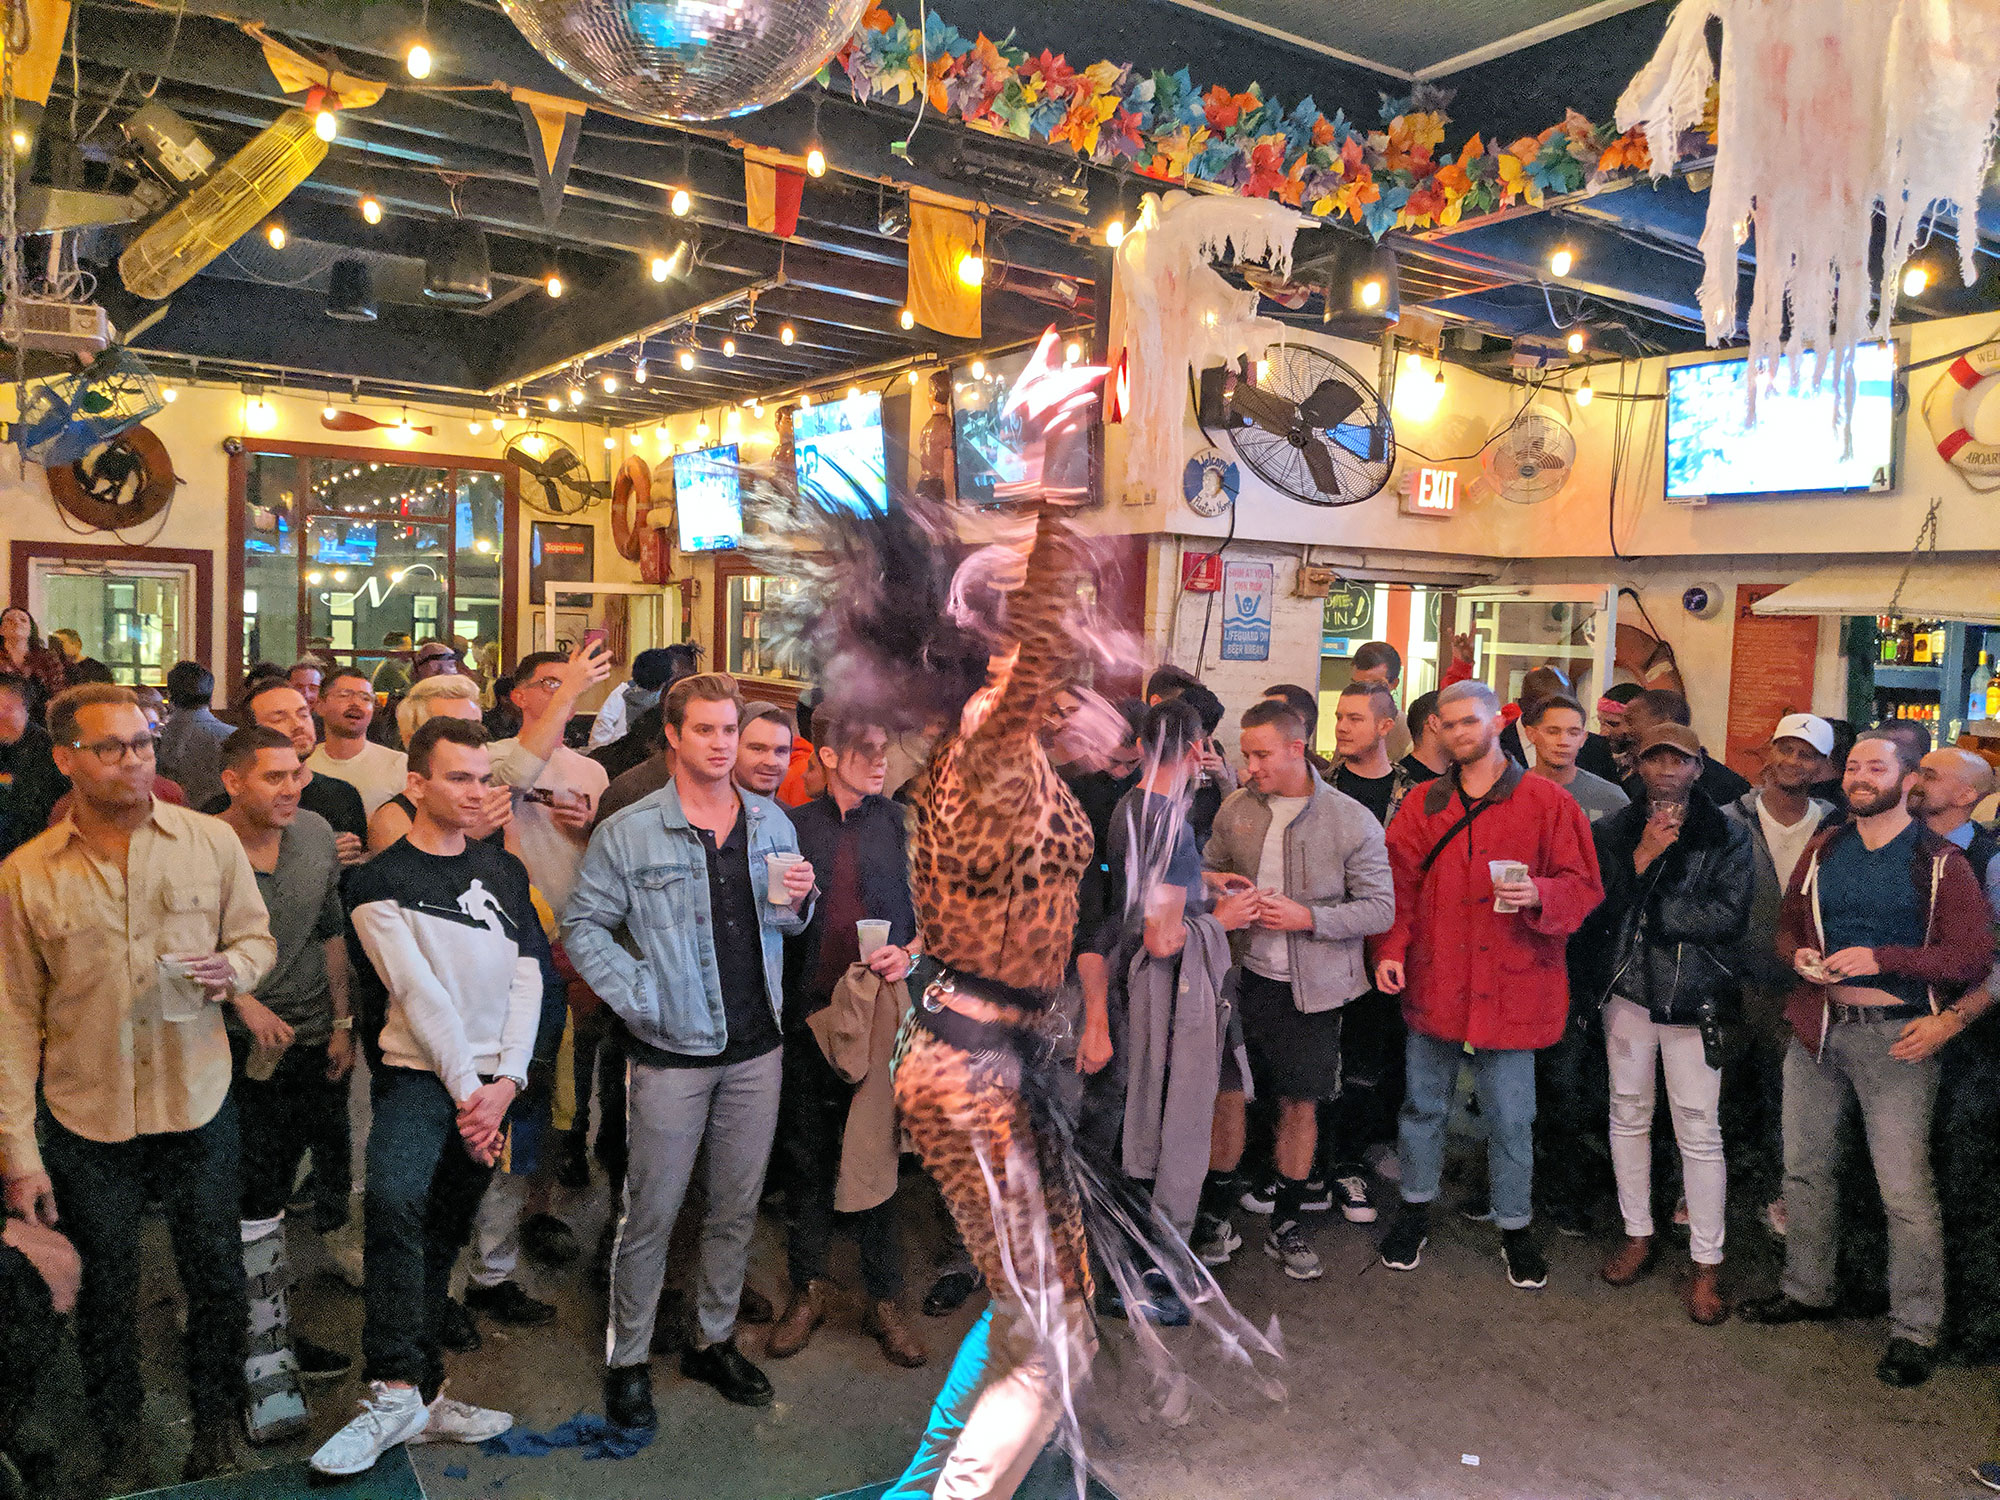 A drag queen performing at Nellie's Sports Bar in Washington DC.